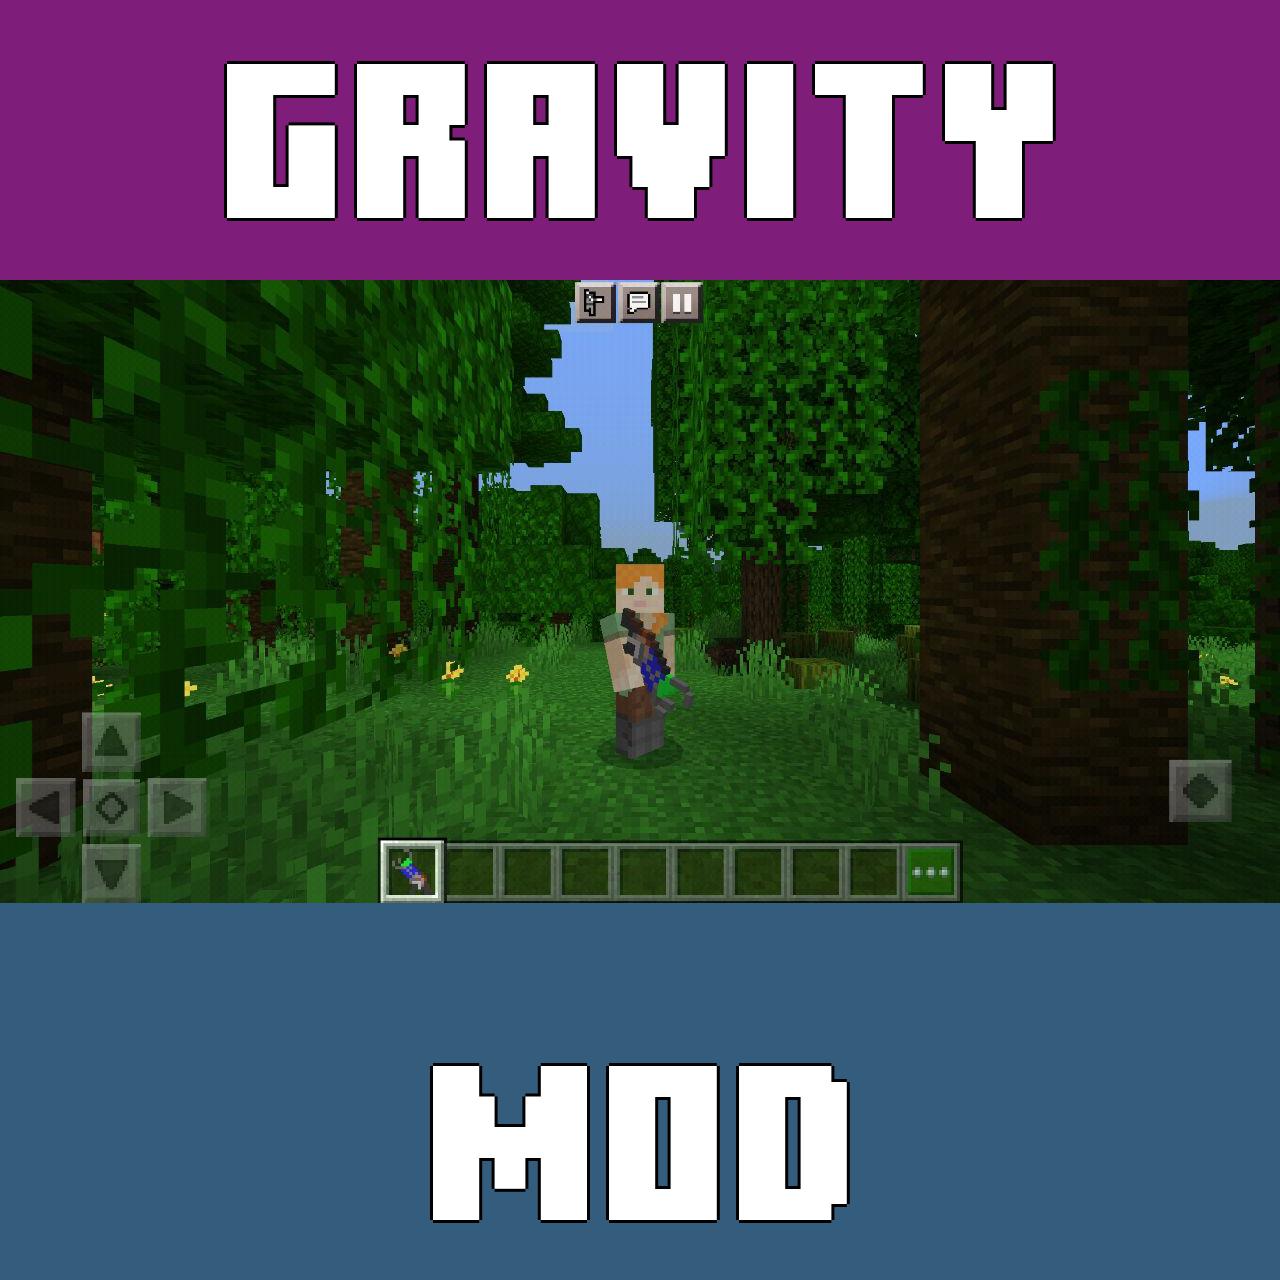 Gravity Changer mod for Minecraft: Everything you need to know